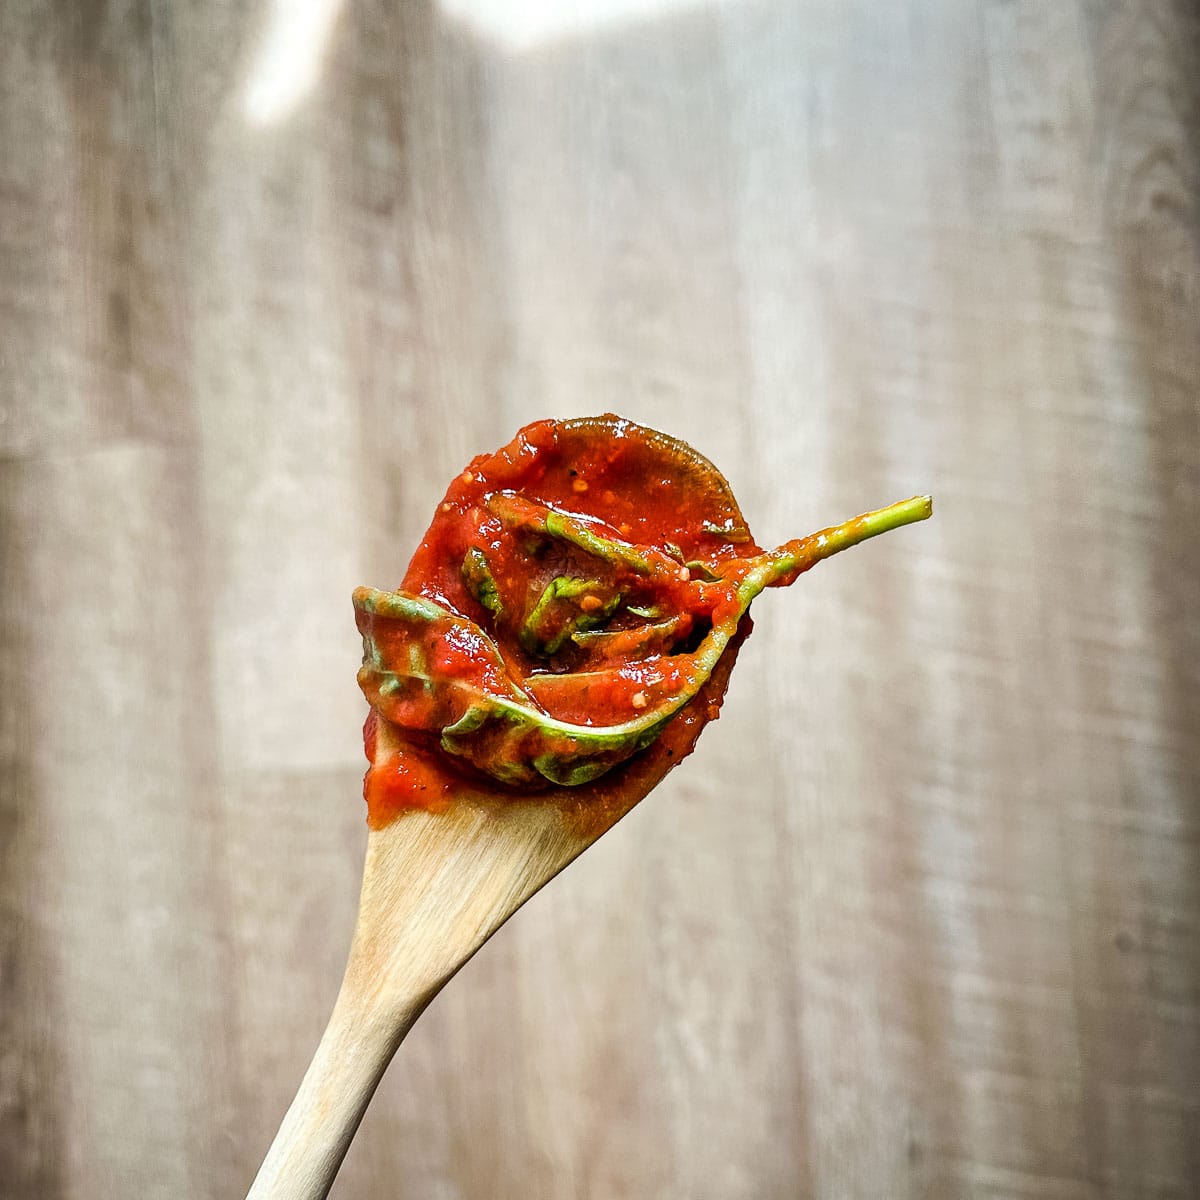 Basi leaves are removed from the marinara sauce.